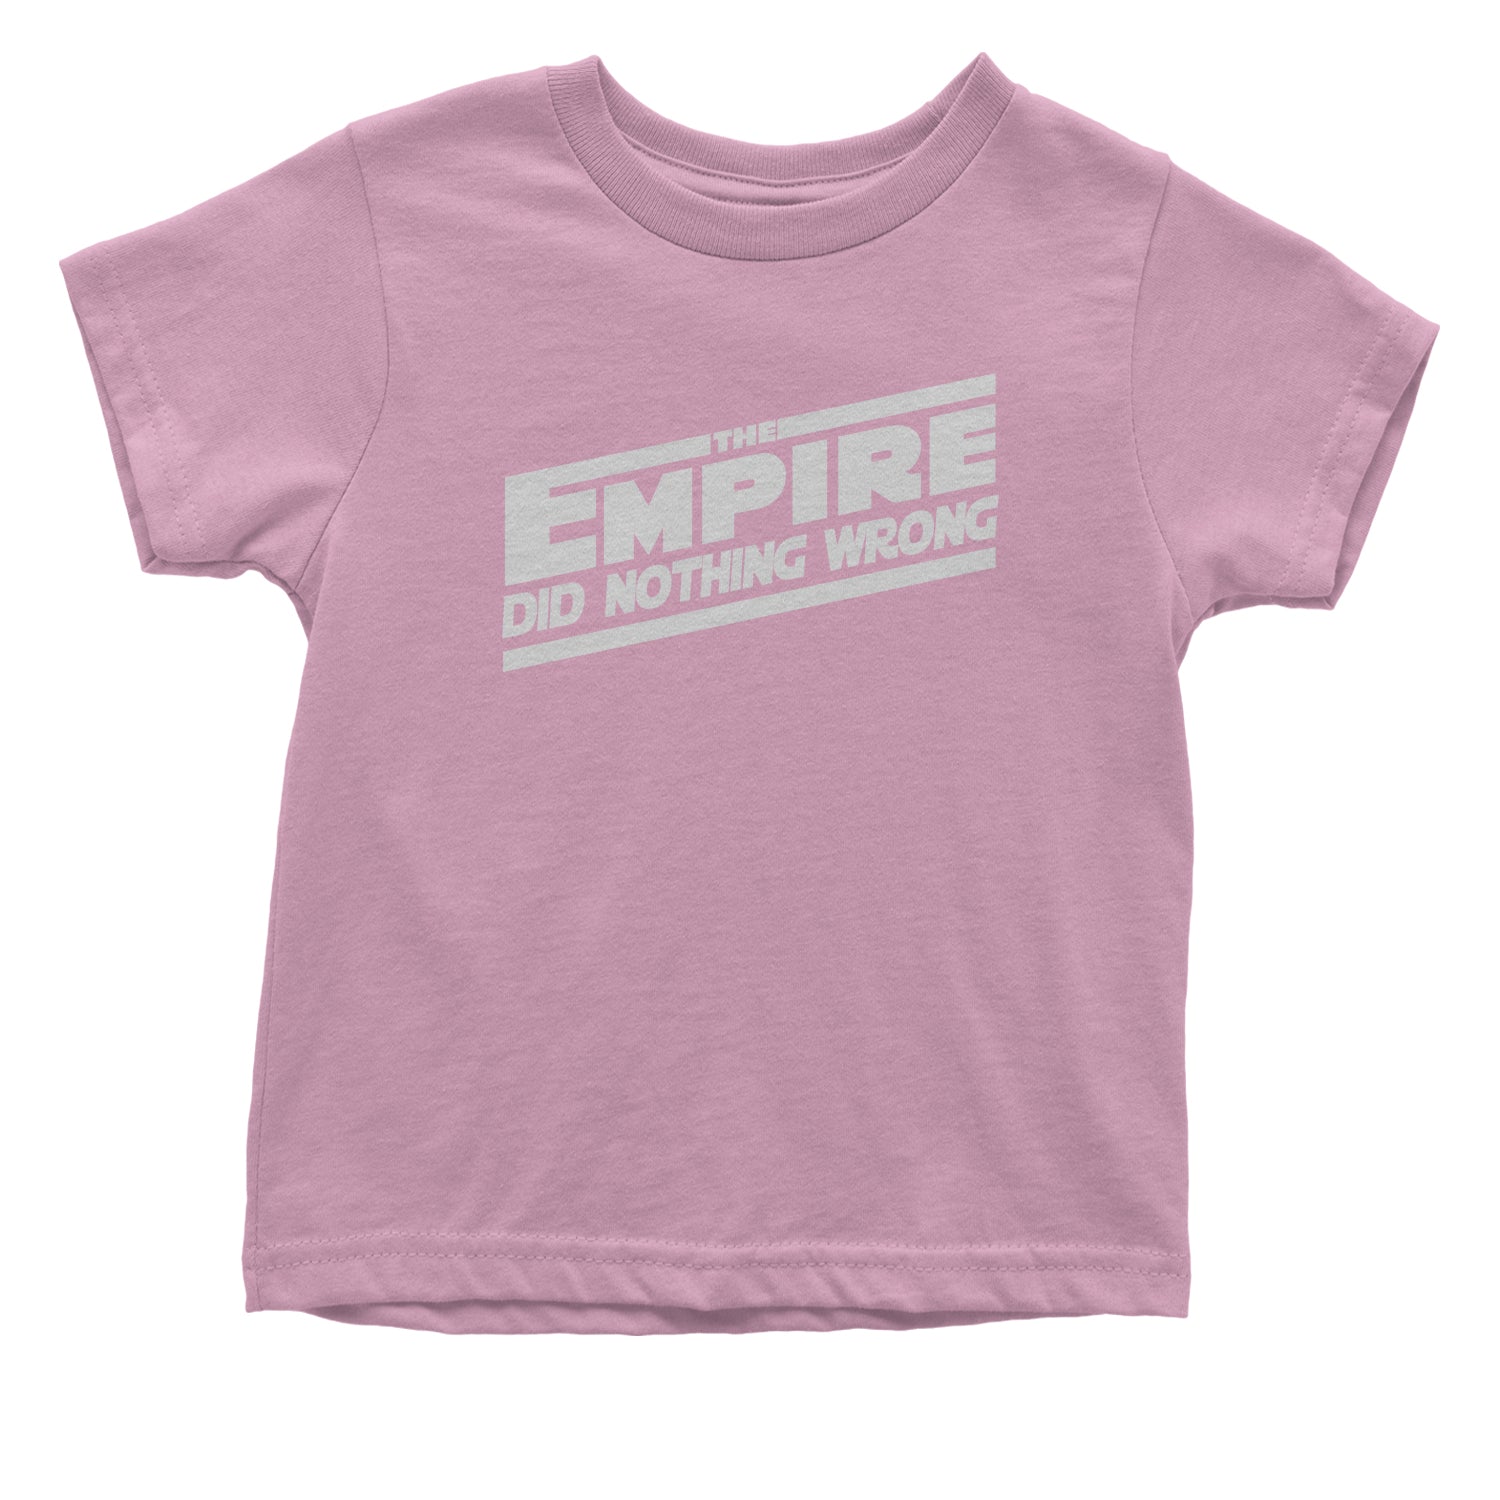 The Empire Did Nothing Wrong Toddler T-Shirt rebel, reddit, space, star, storm, subreddit, tropper, wars by Expression Tees